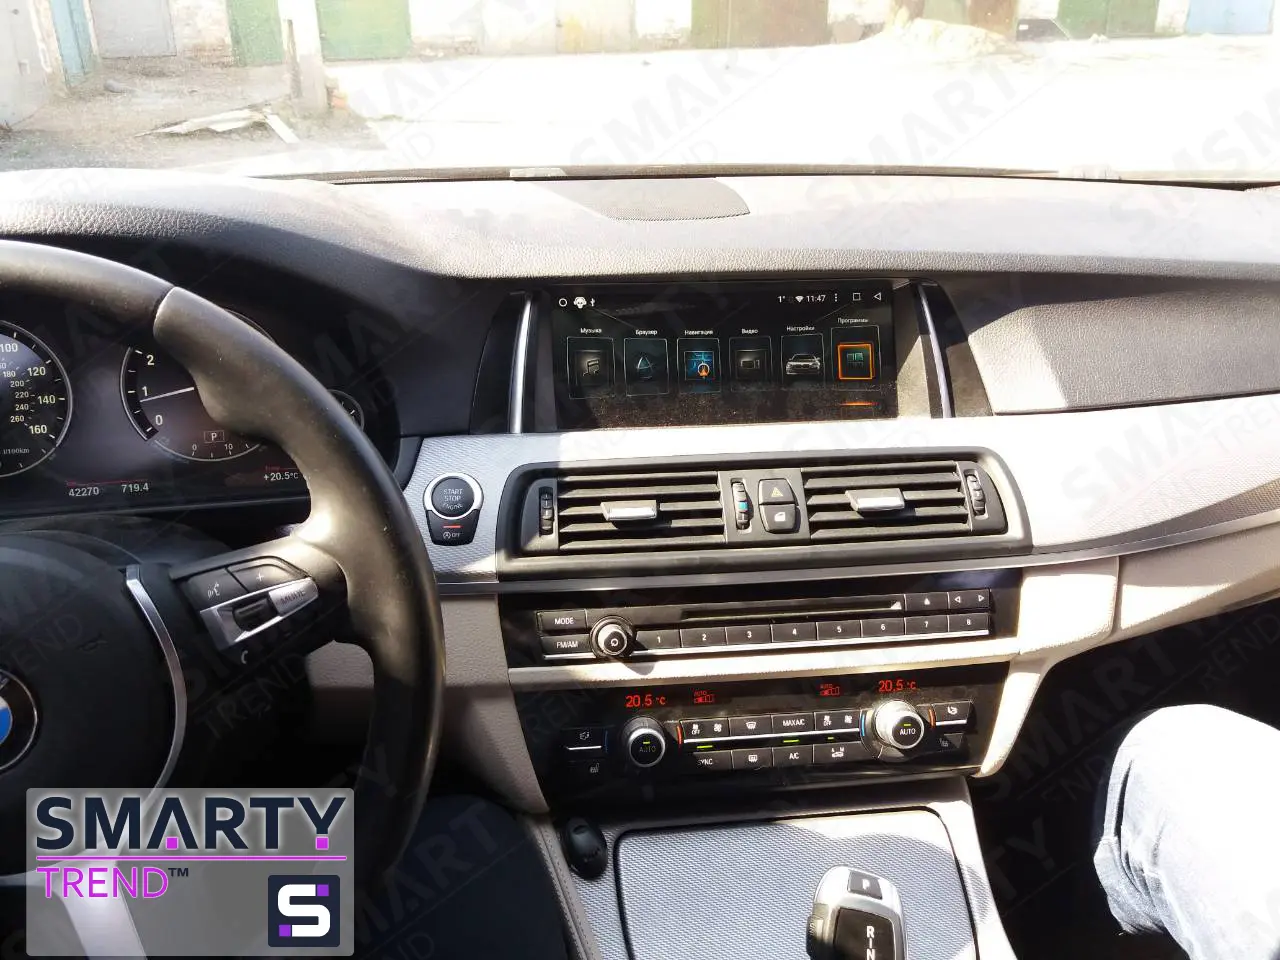 SMARTY Trend head unit for BMW F10